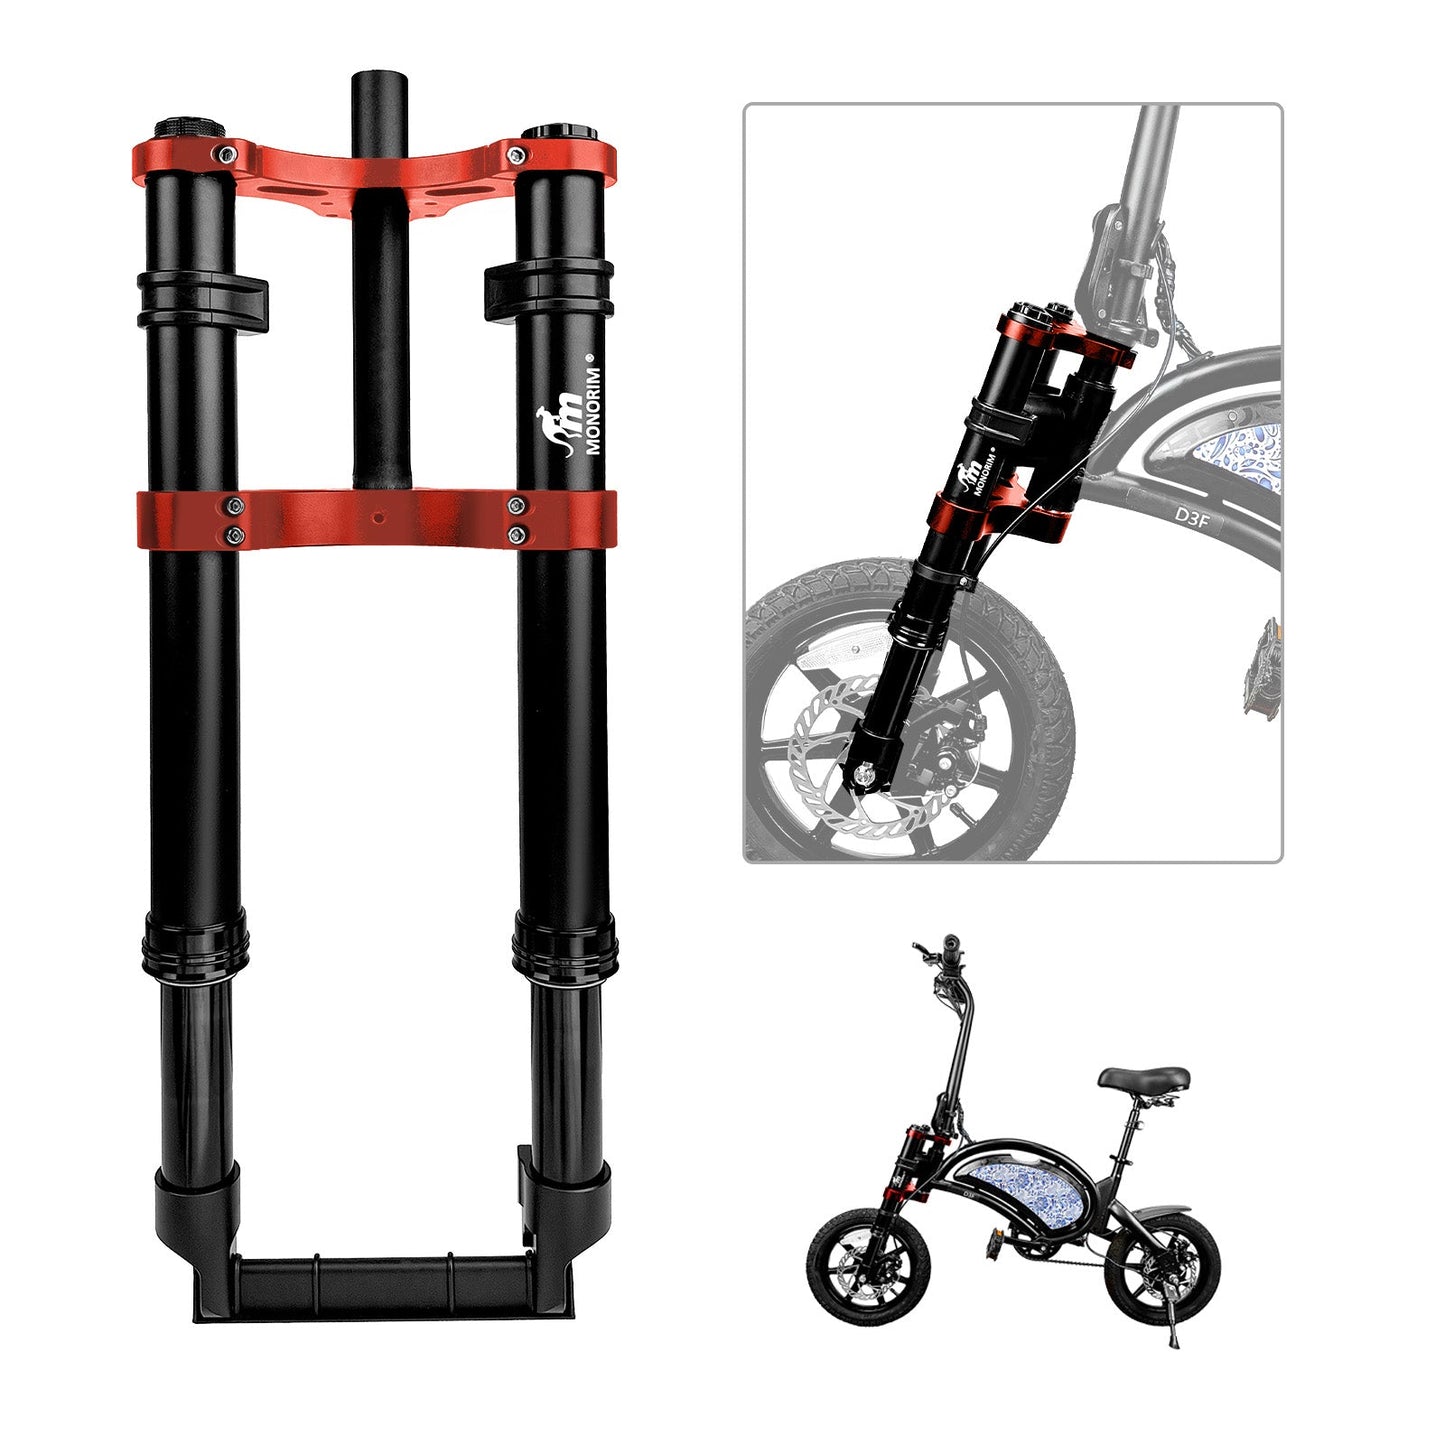 Monorim MD0-14inch front suspension modify great kit to be more safety and comfort for DYU A5 ebike ：